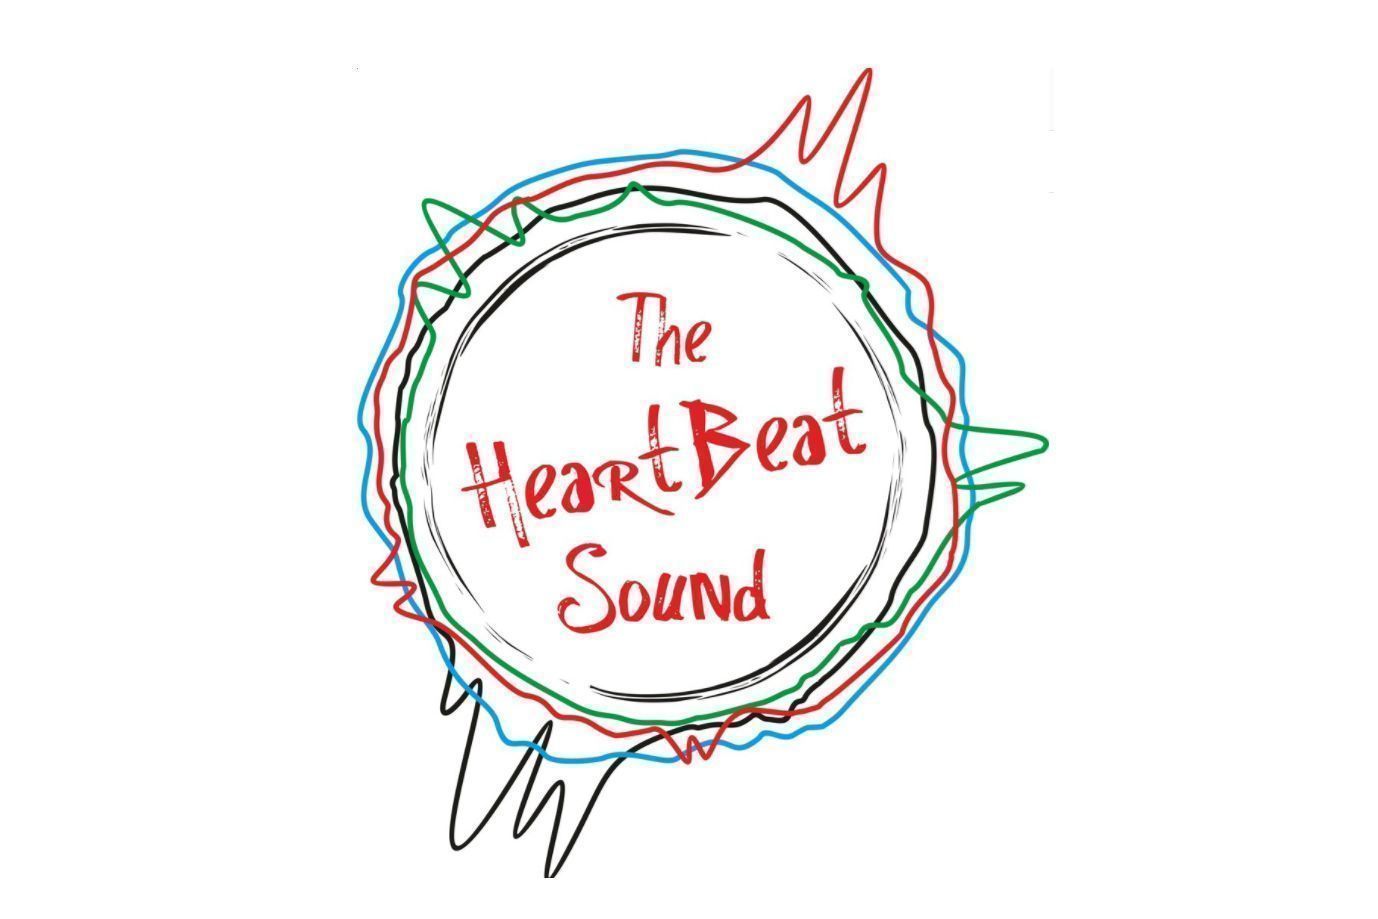 The HeartBeat Sound